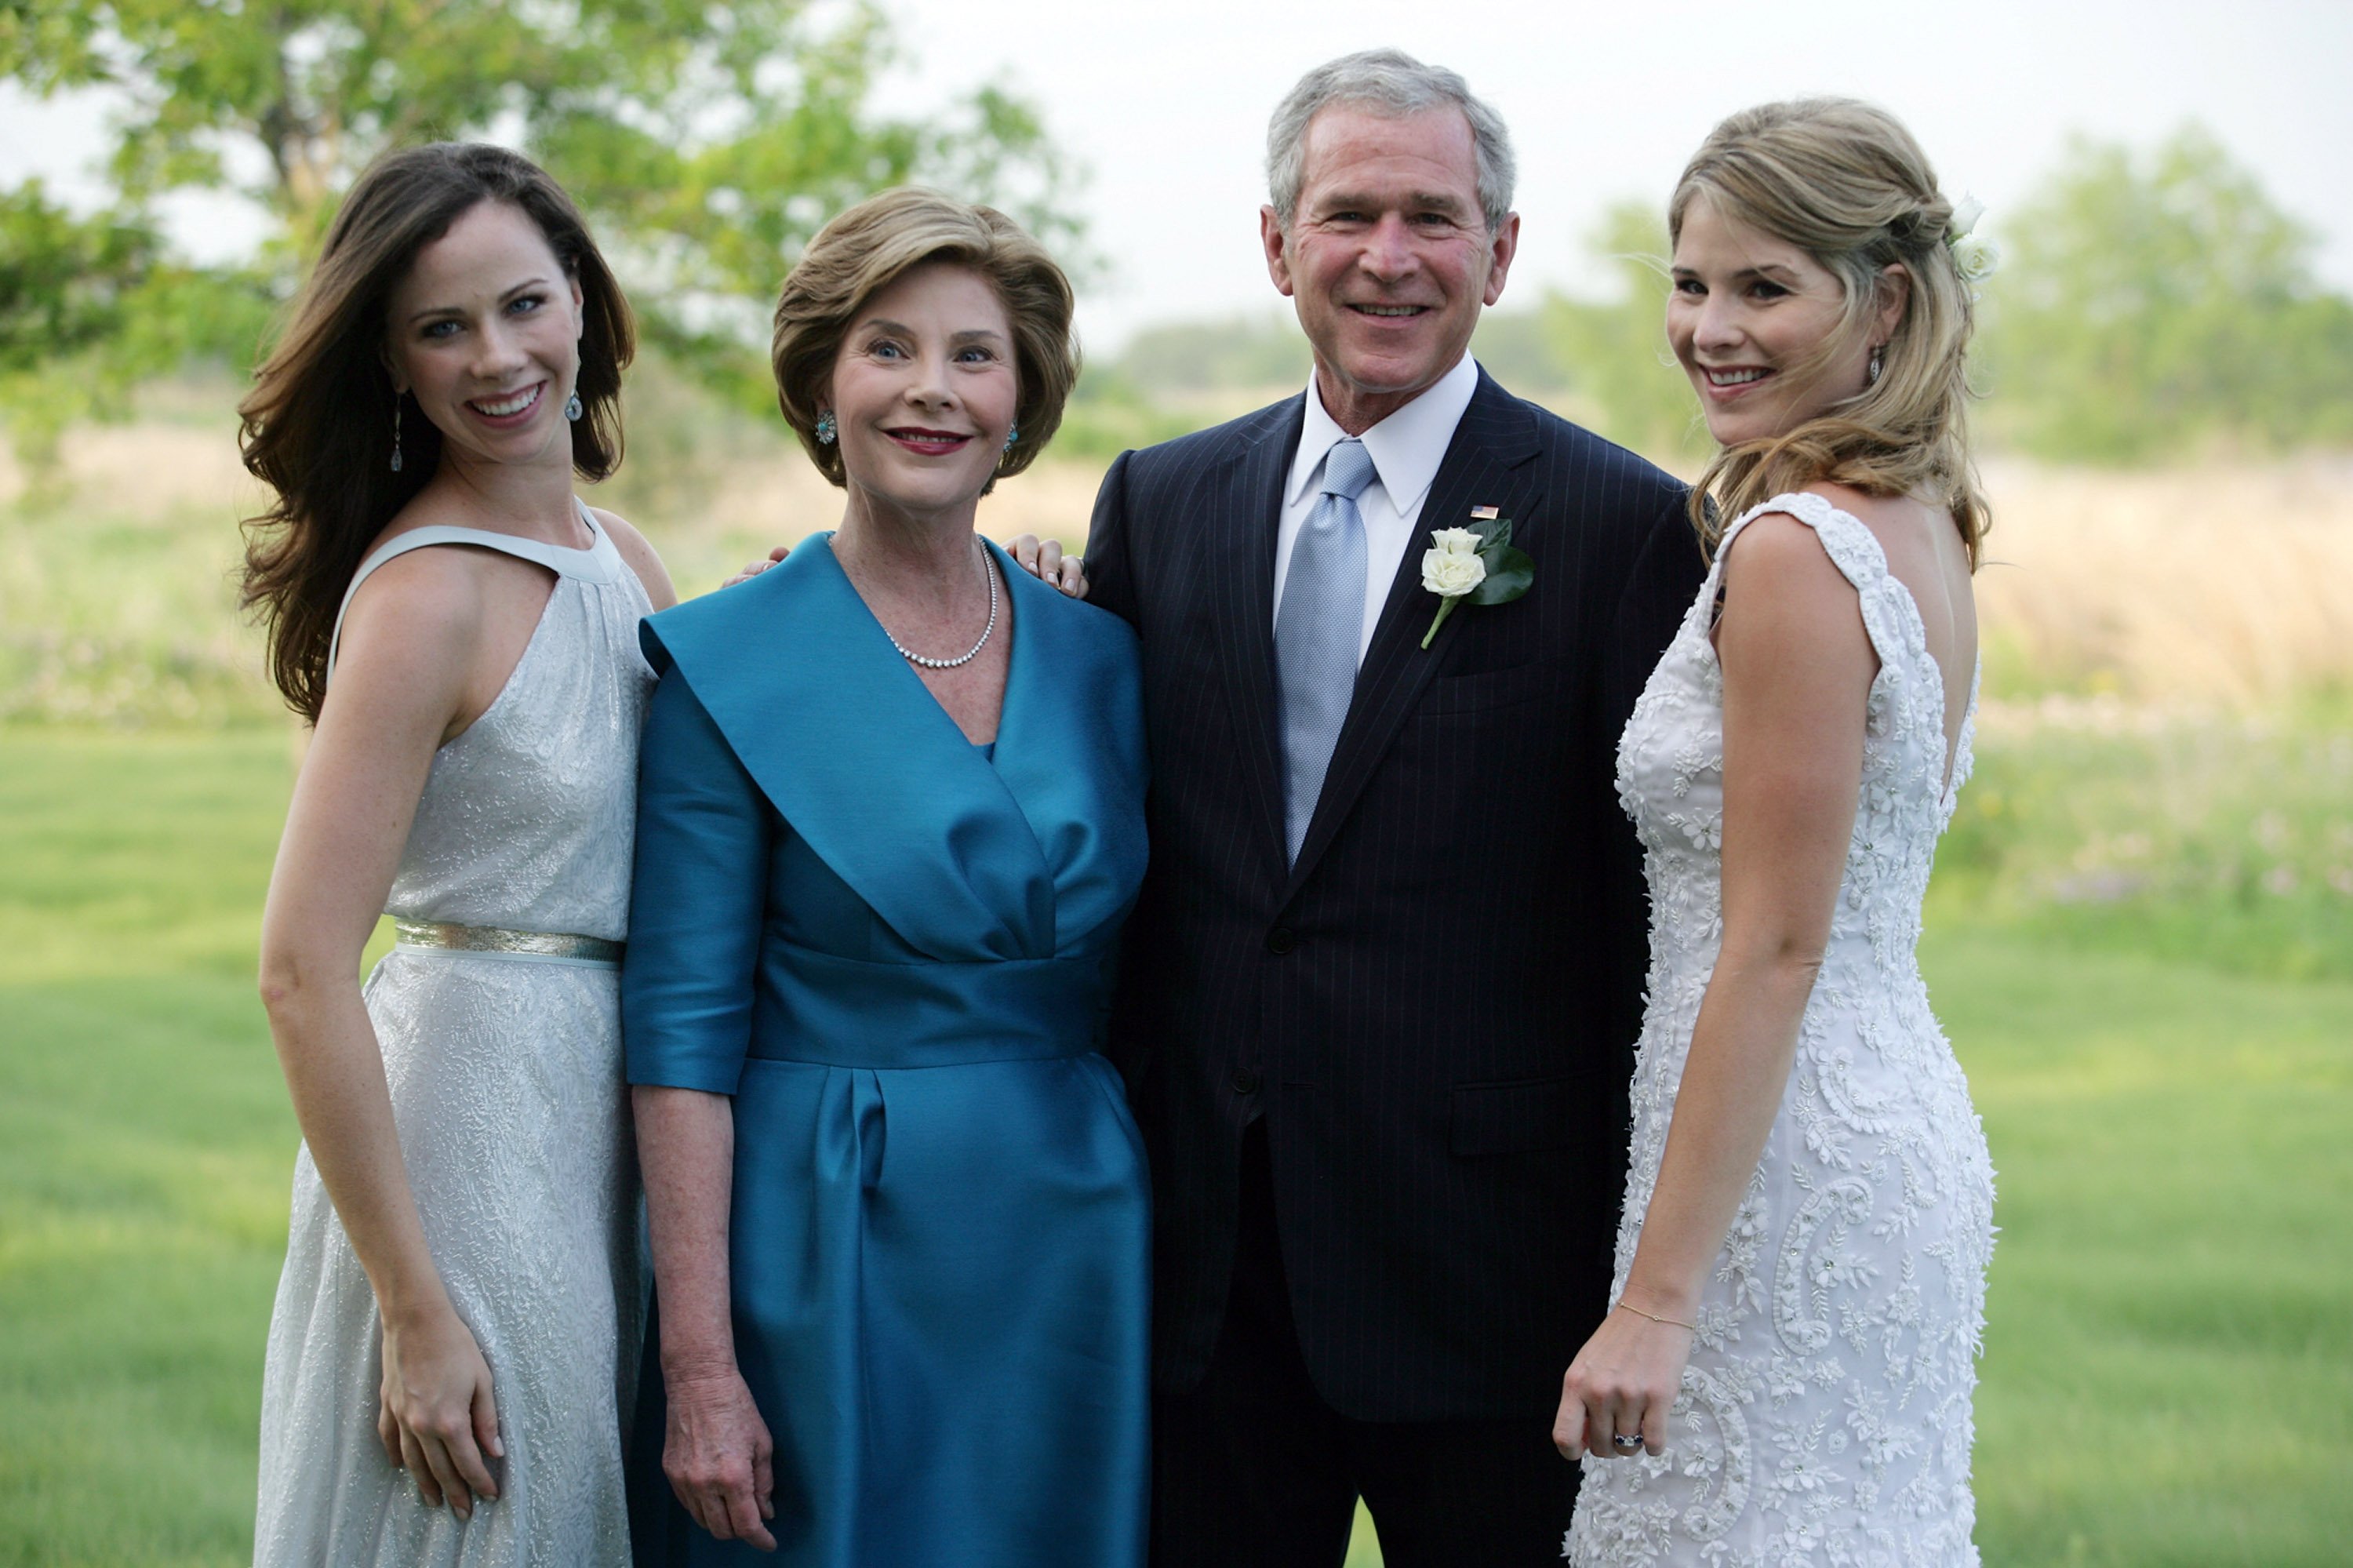 U.S. President George W. Bush and Mrs. Laura Bush pose with daughters Jenna (R) and Barbara (L) prior to the wedding of Jenna and Henry Hager May 10, 2008 near Crawford, Texas | Source: Getty Images 